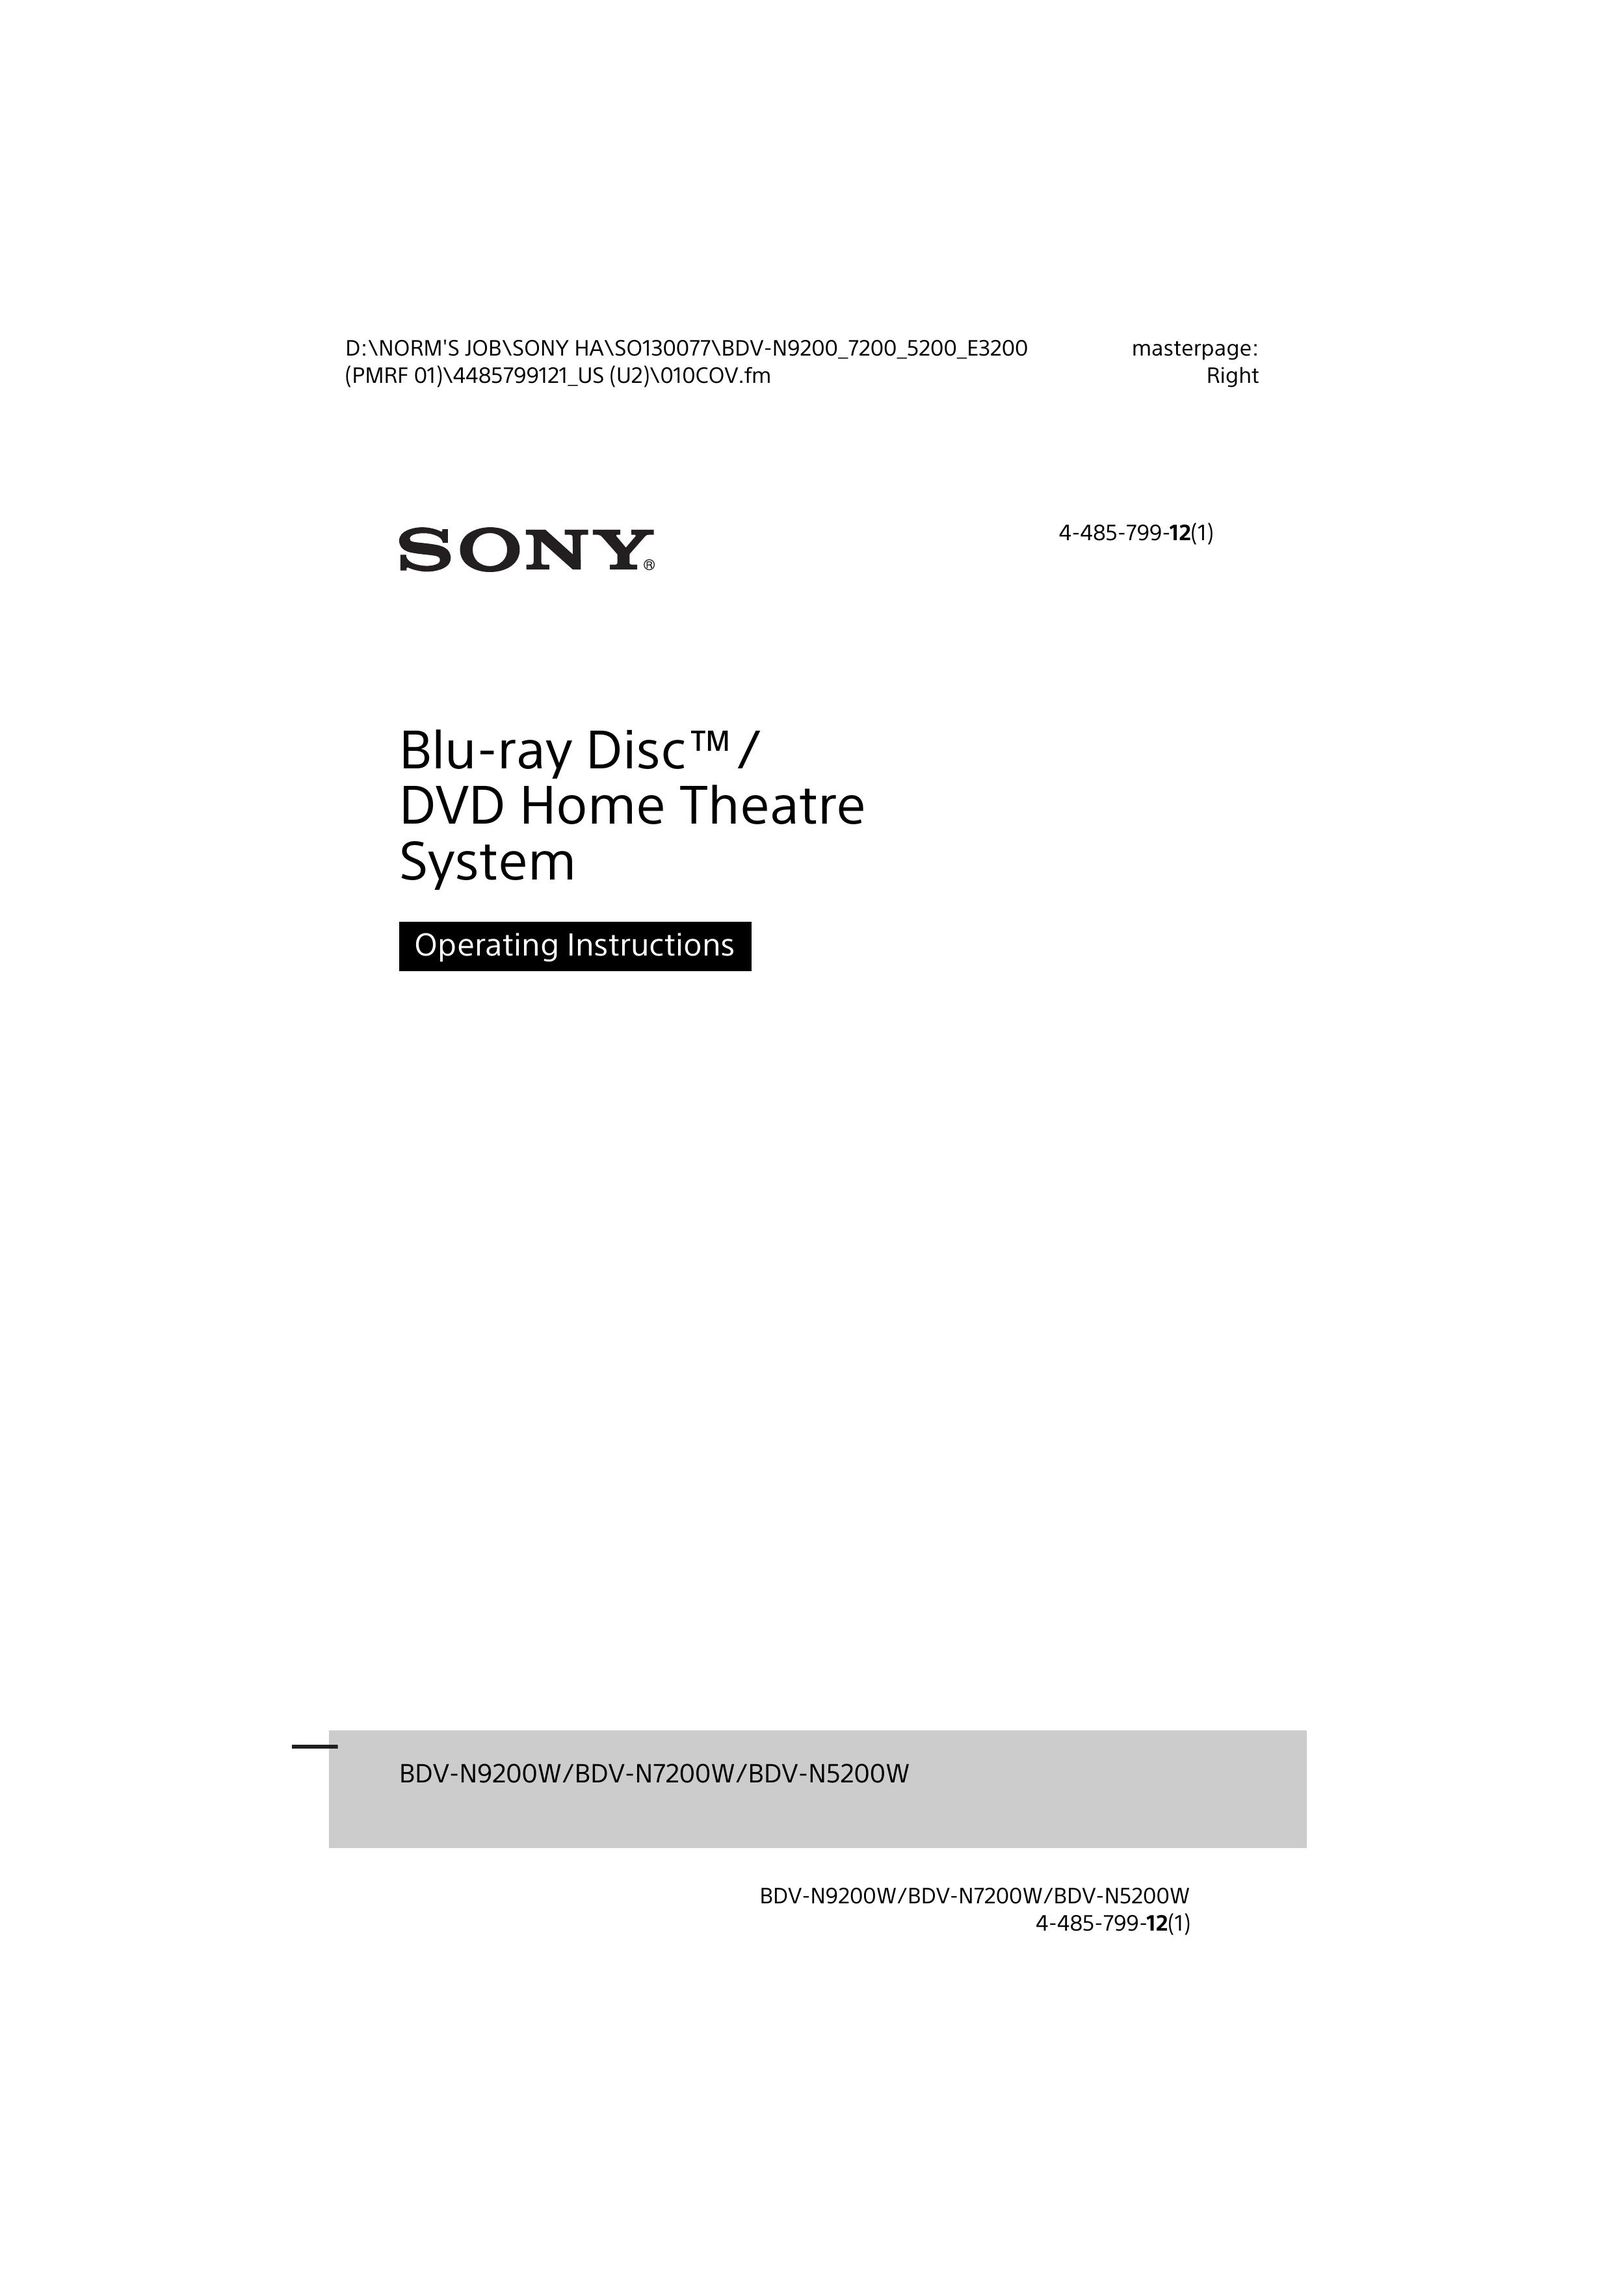 Sony BDV-N7200W Home Theater System User Manual